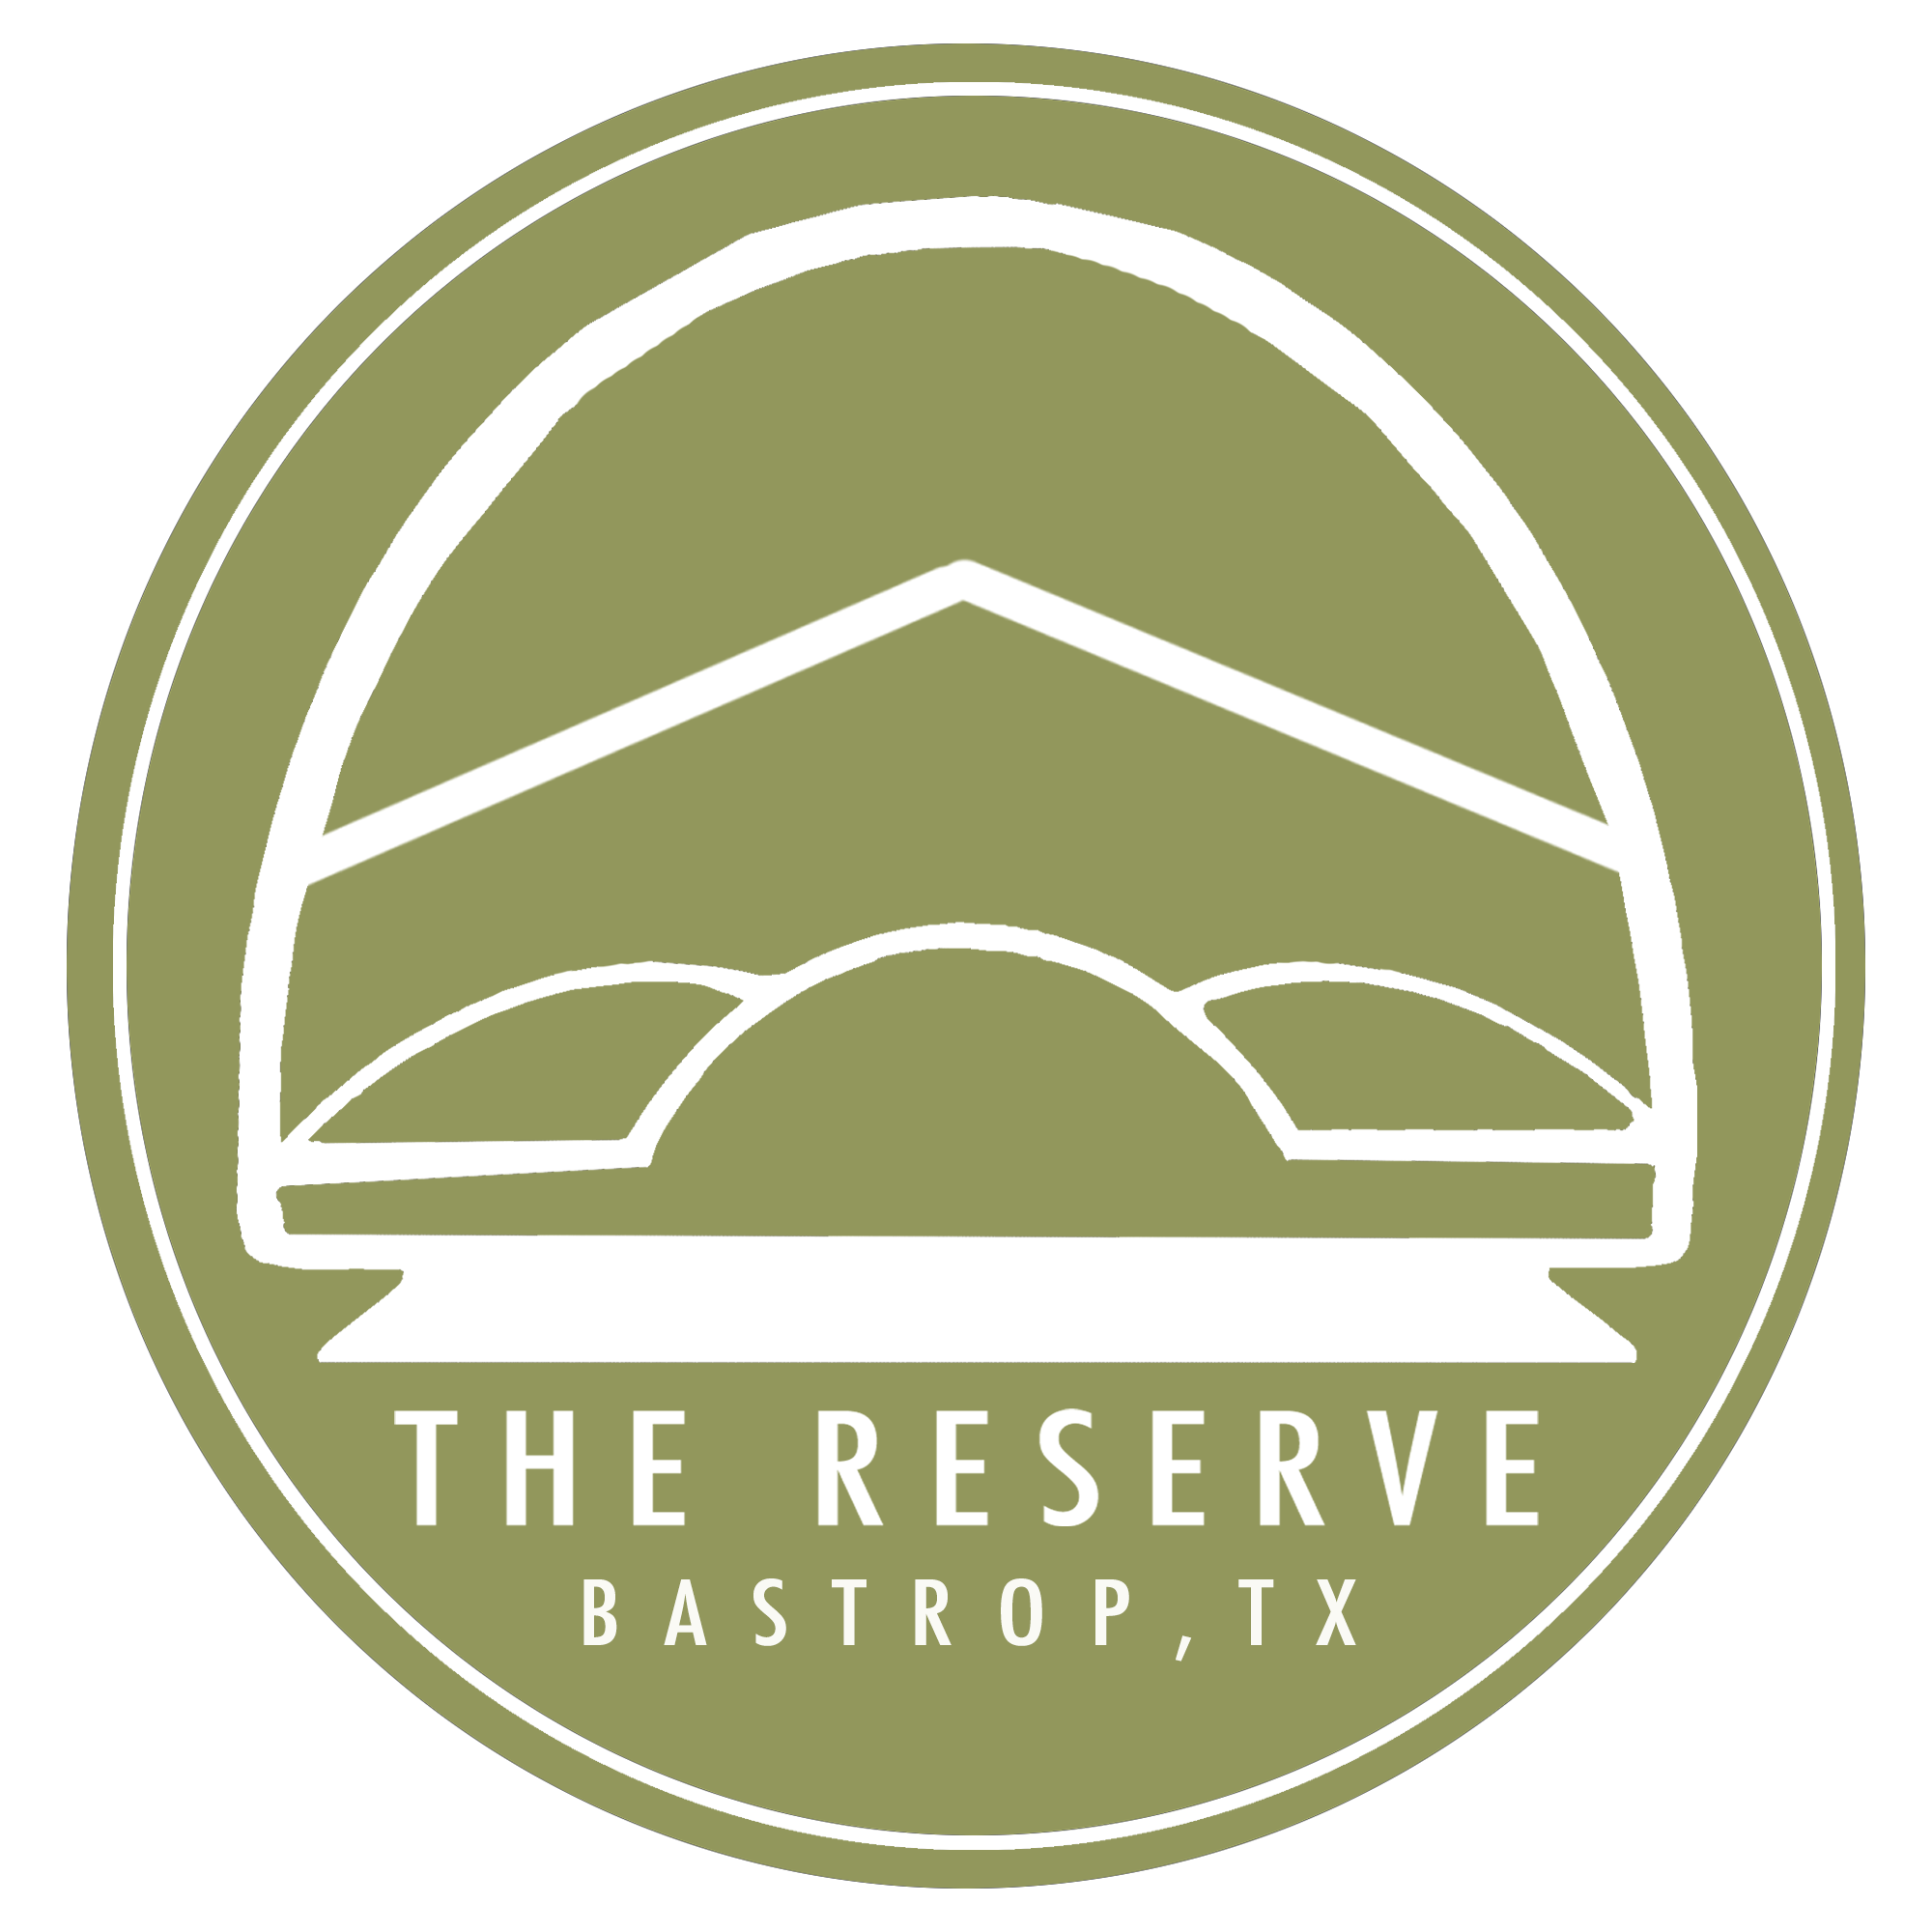 THE RESERVE